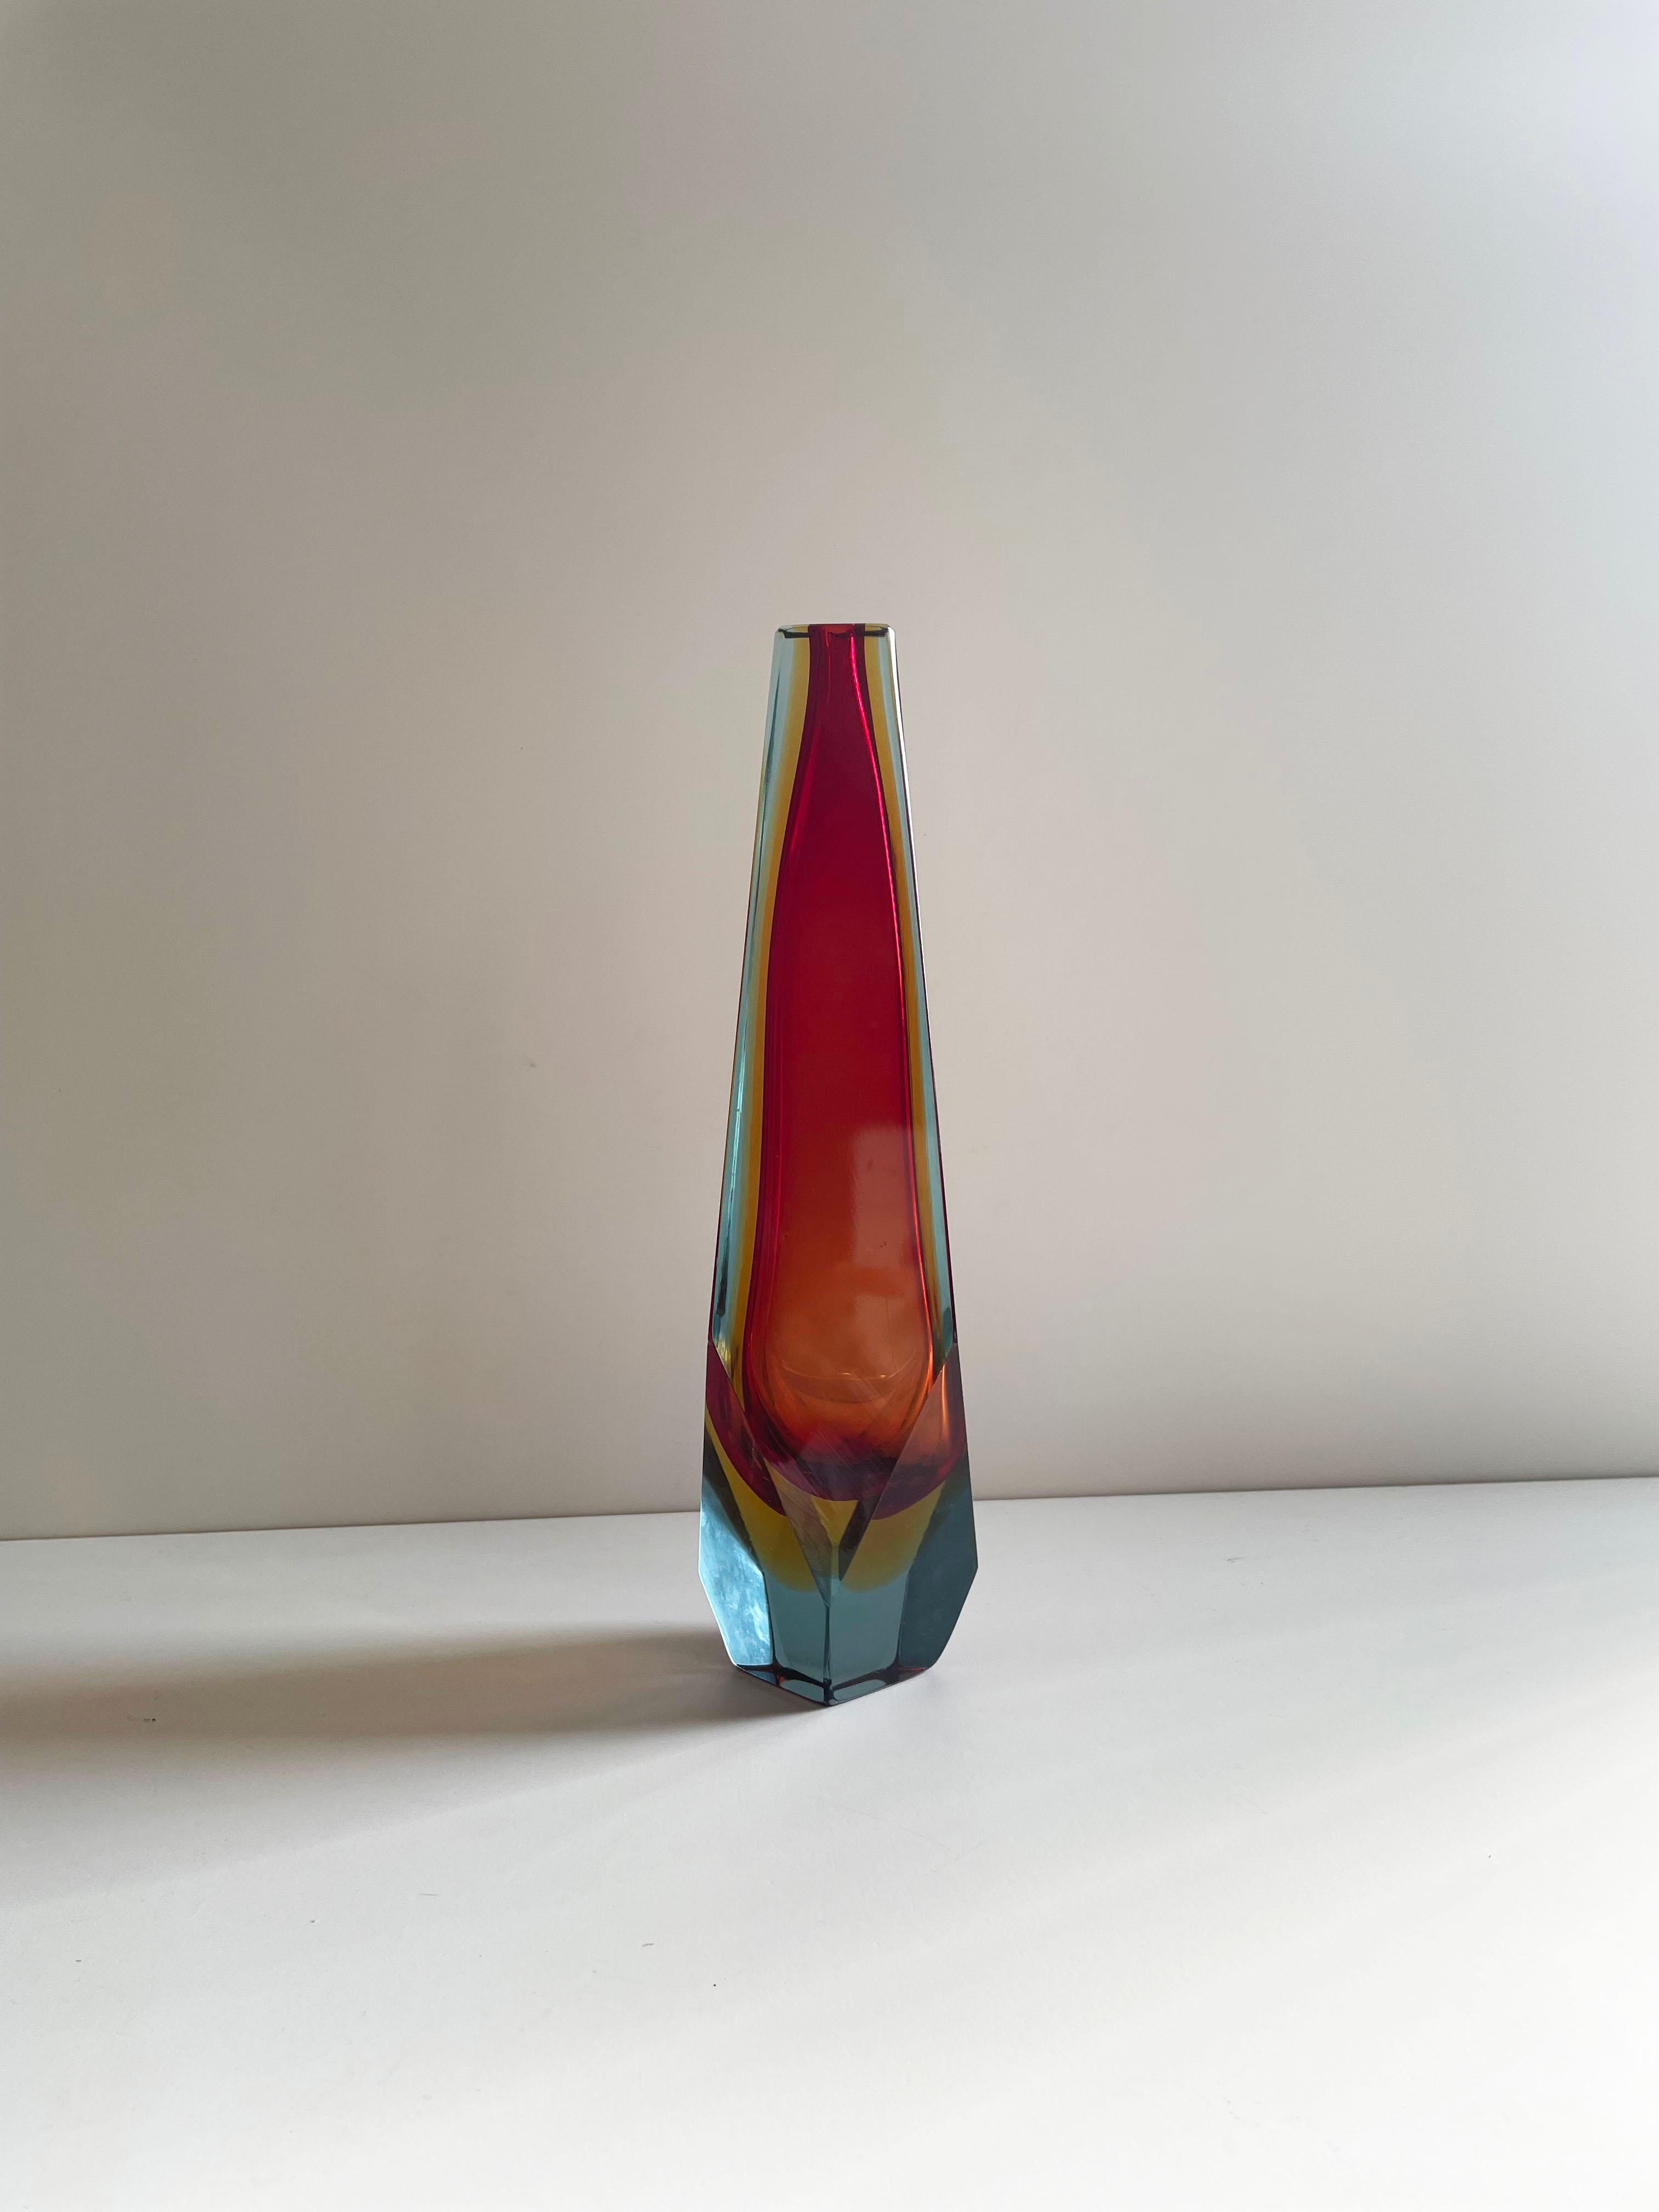 Mid-Century Modern Sommerso Faceted Murano Glass Vase San MarCo, Alessandro Mandruzzato, Italy 1960 For Sale